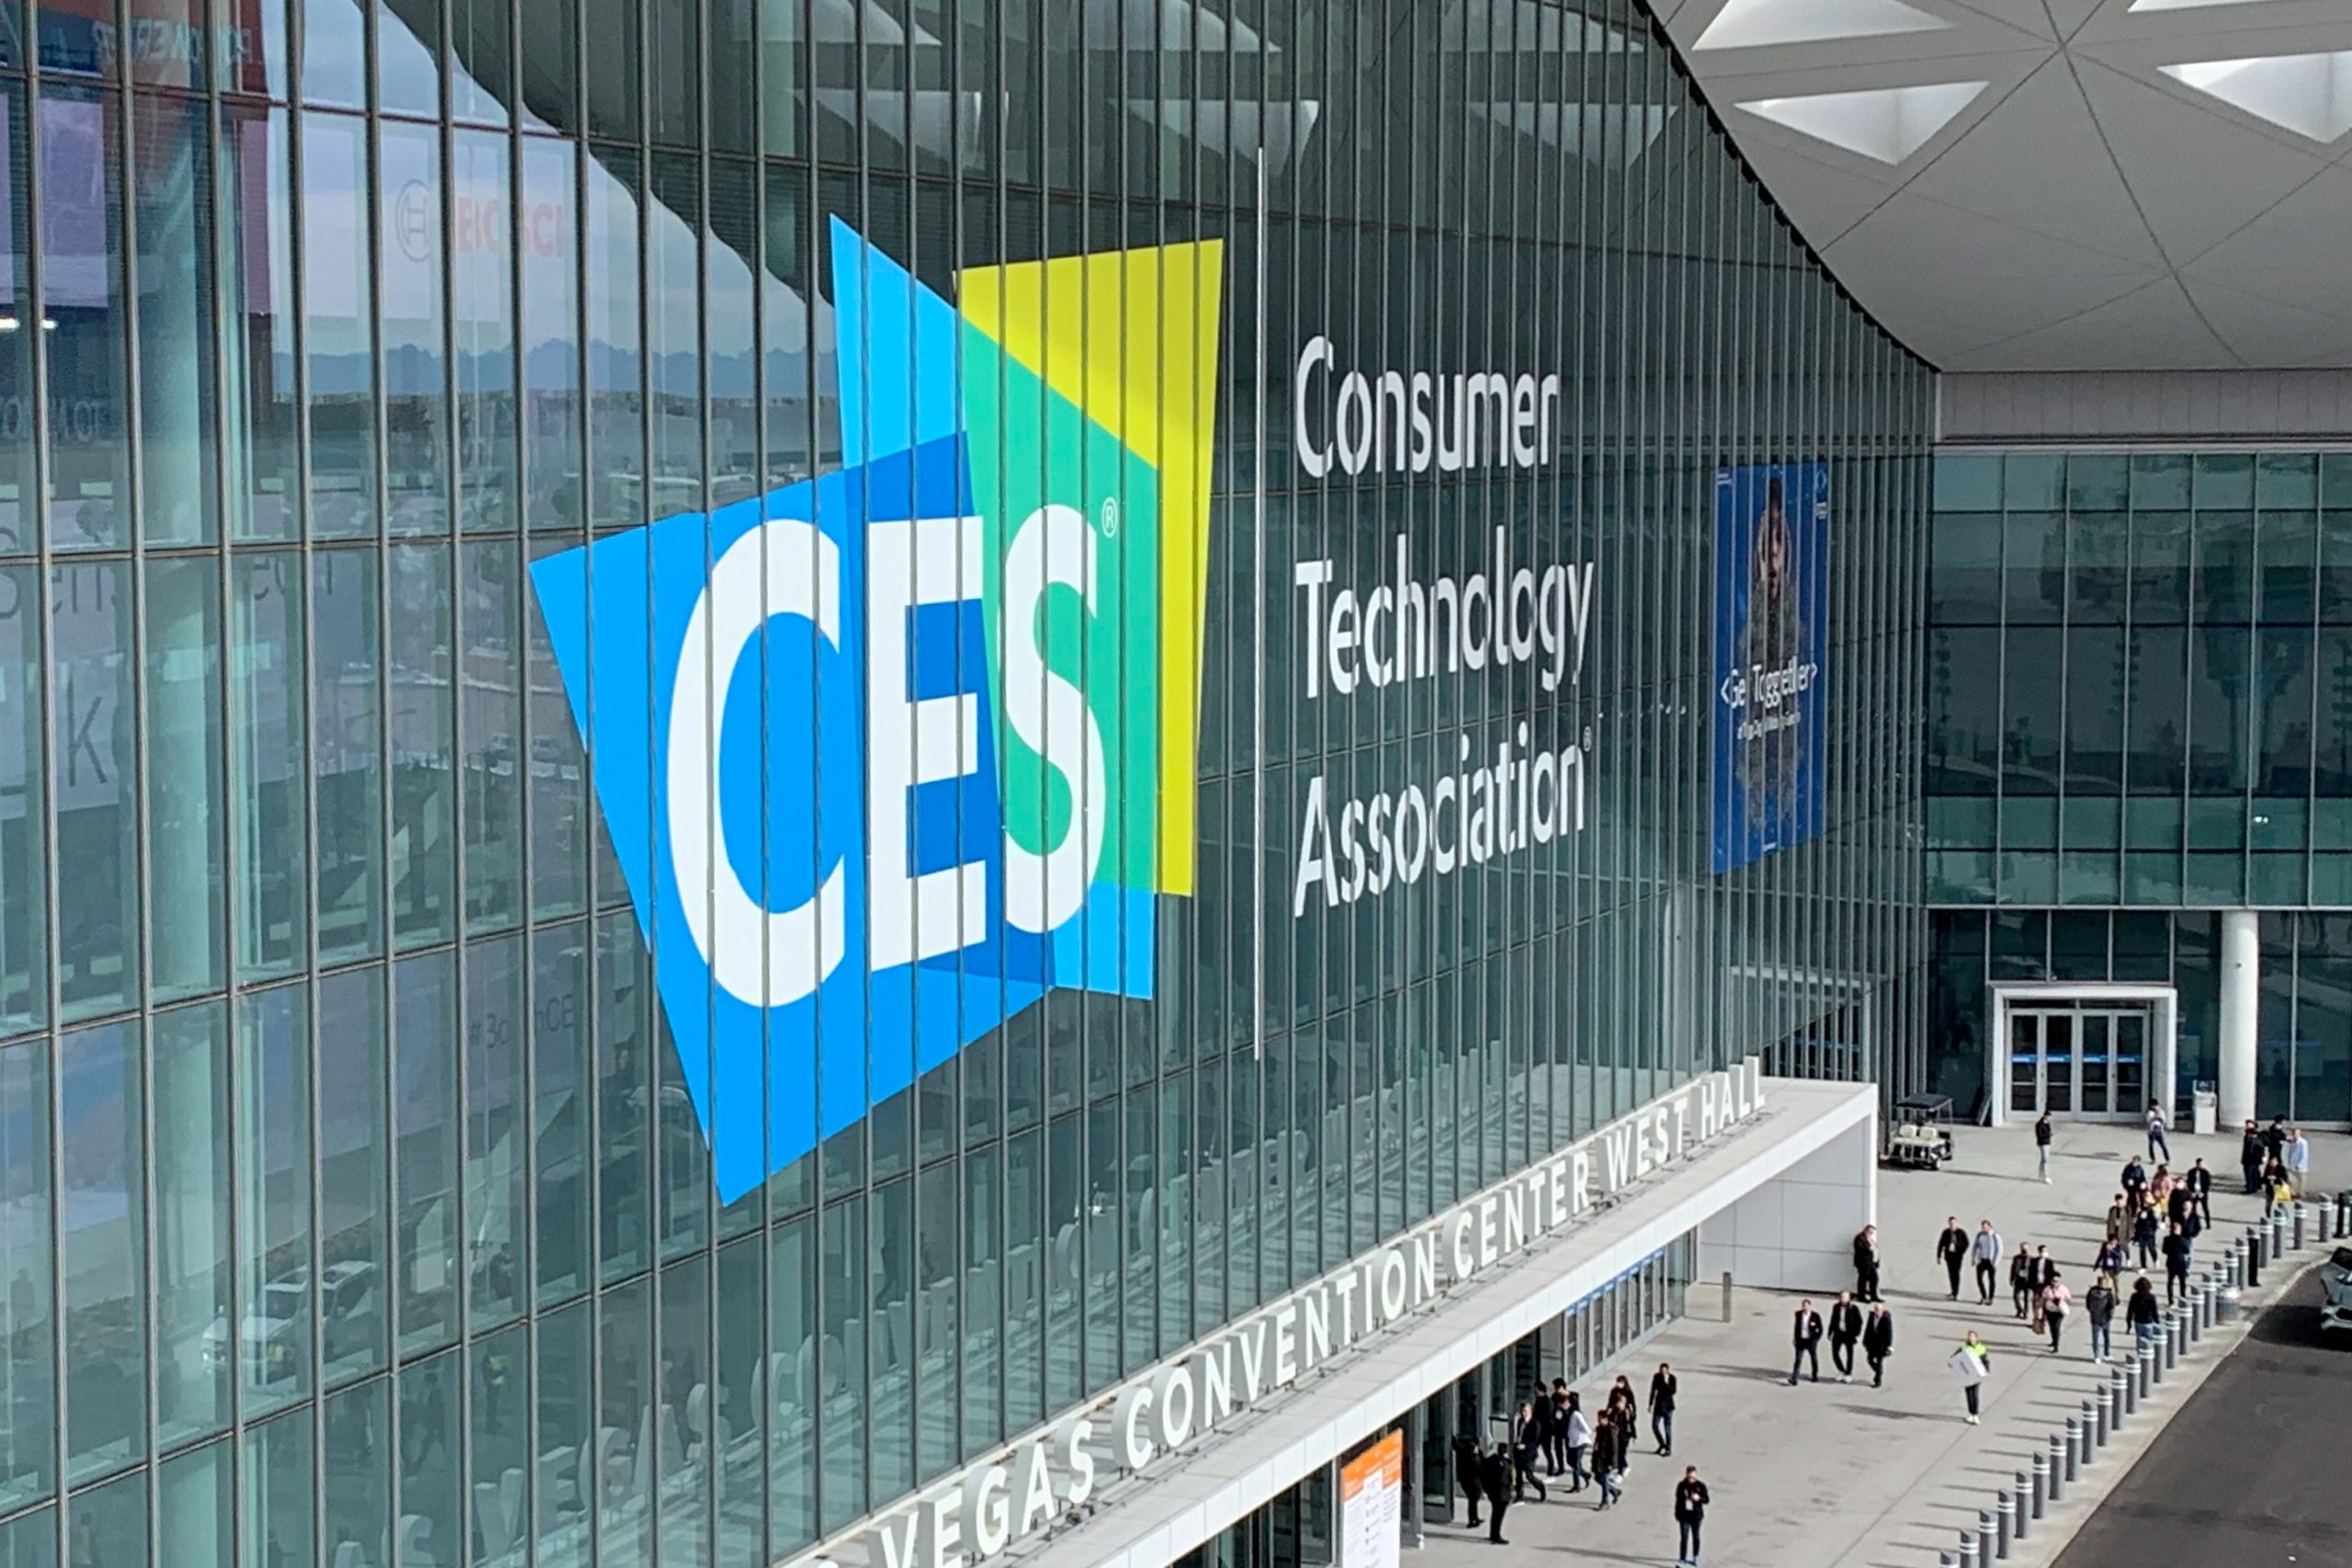 Curtain lifts on Project Arrow in Las Vegas at CES 2023